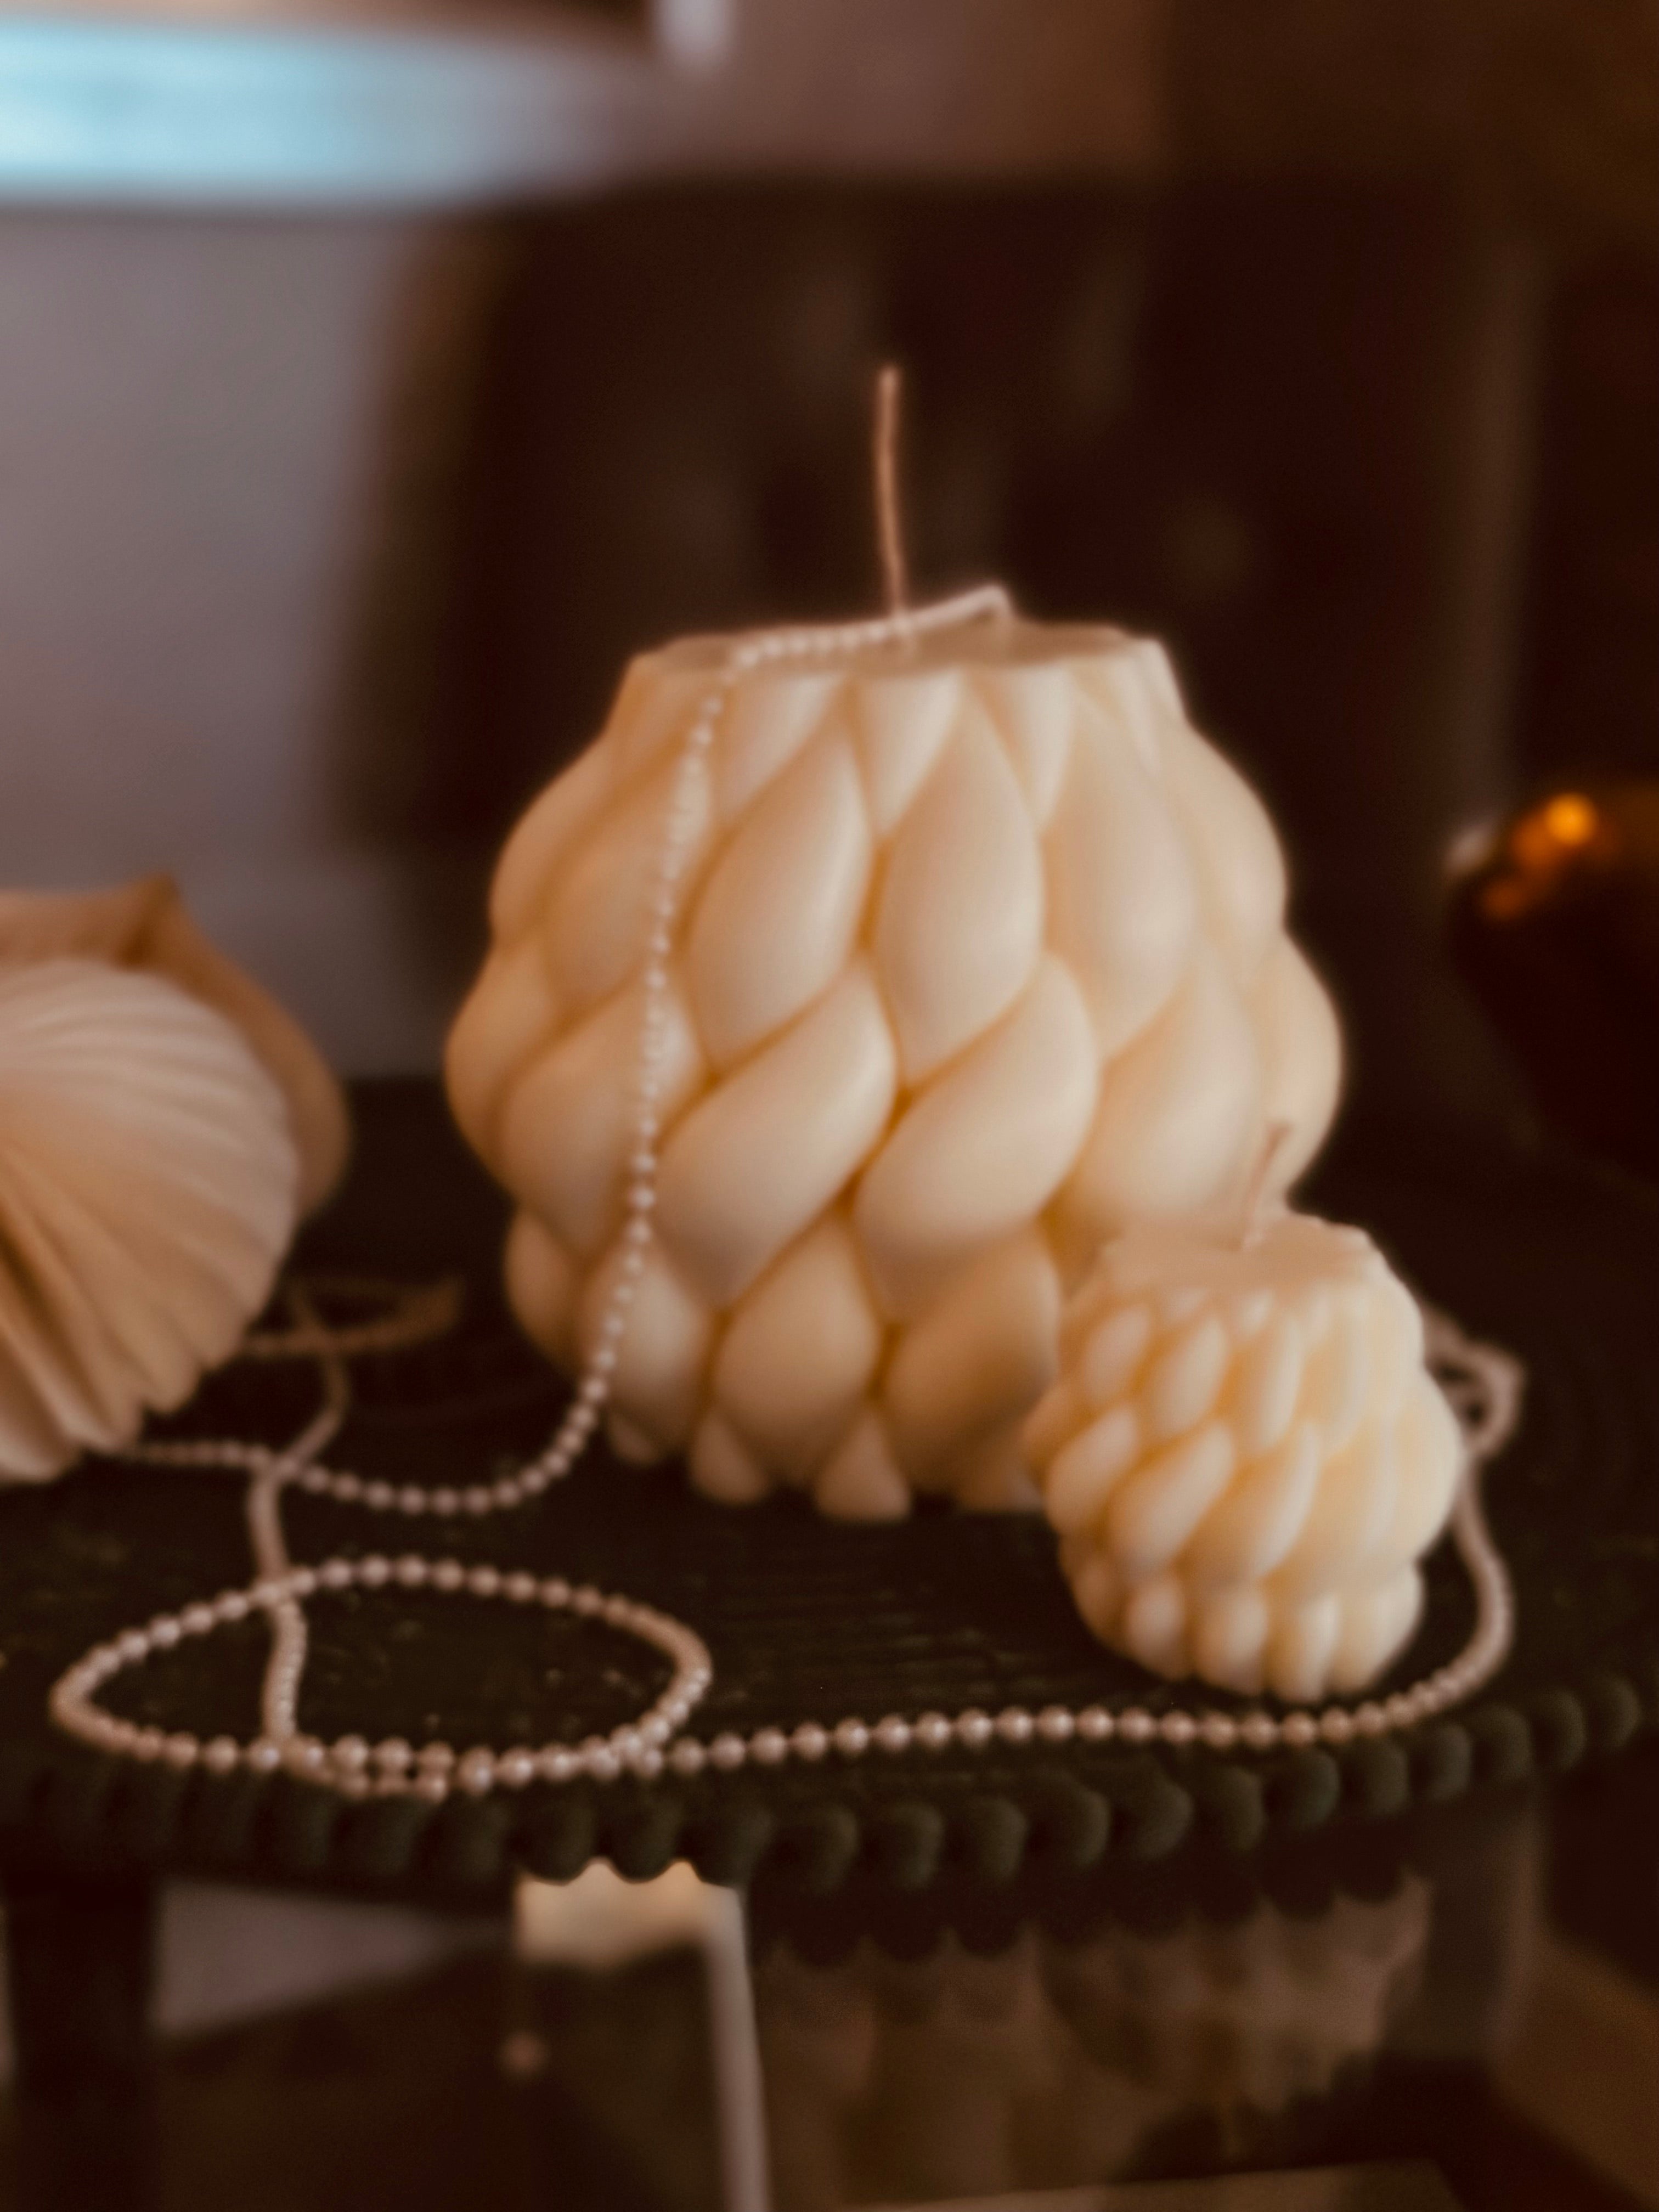 Introducing our captivating Soy Wax Extra Large Rope Pillar Candle. The rope design of this sculptural candle adds a touch of sophistication to any room.